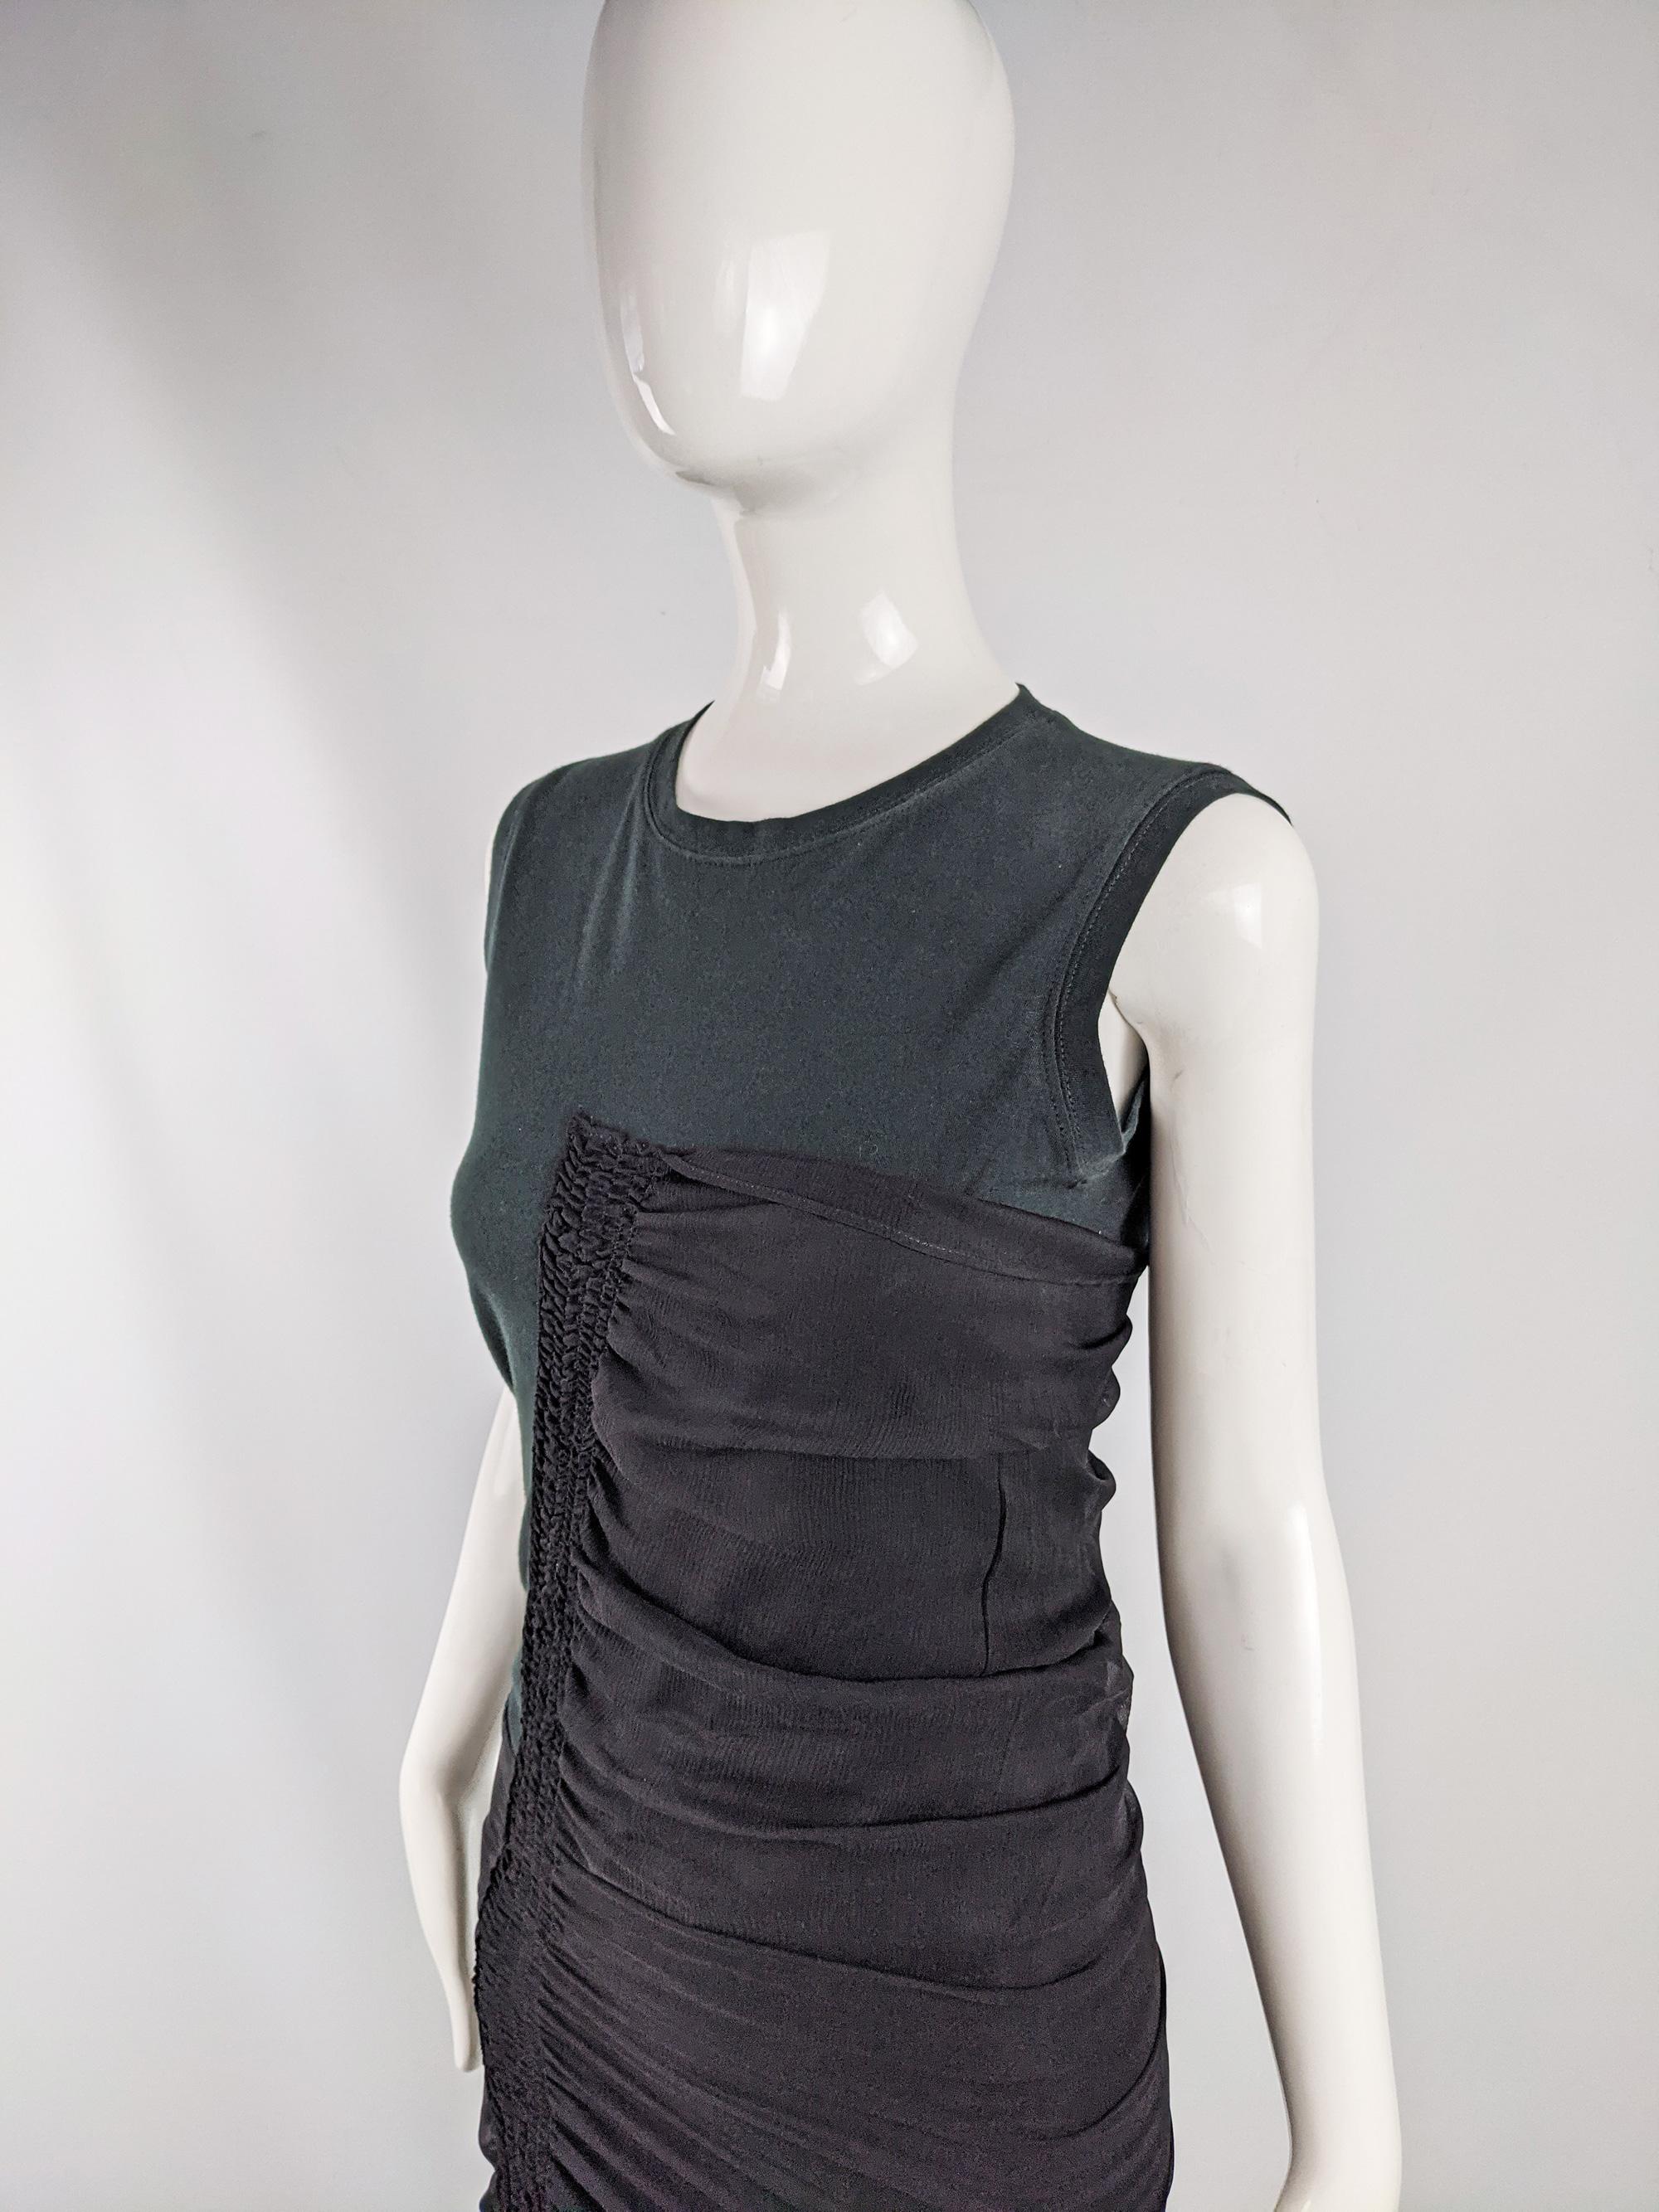 Jean Colonna Vintage Black Ruched Mixed Media Party Dress 1